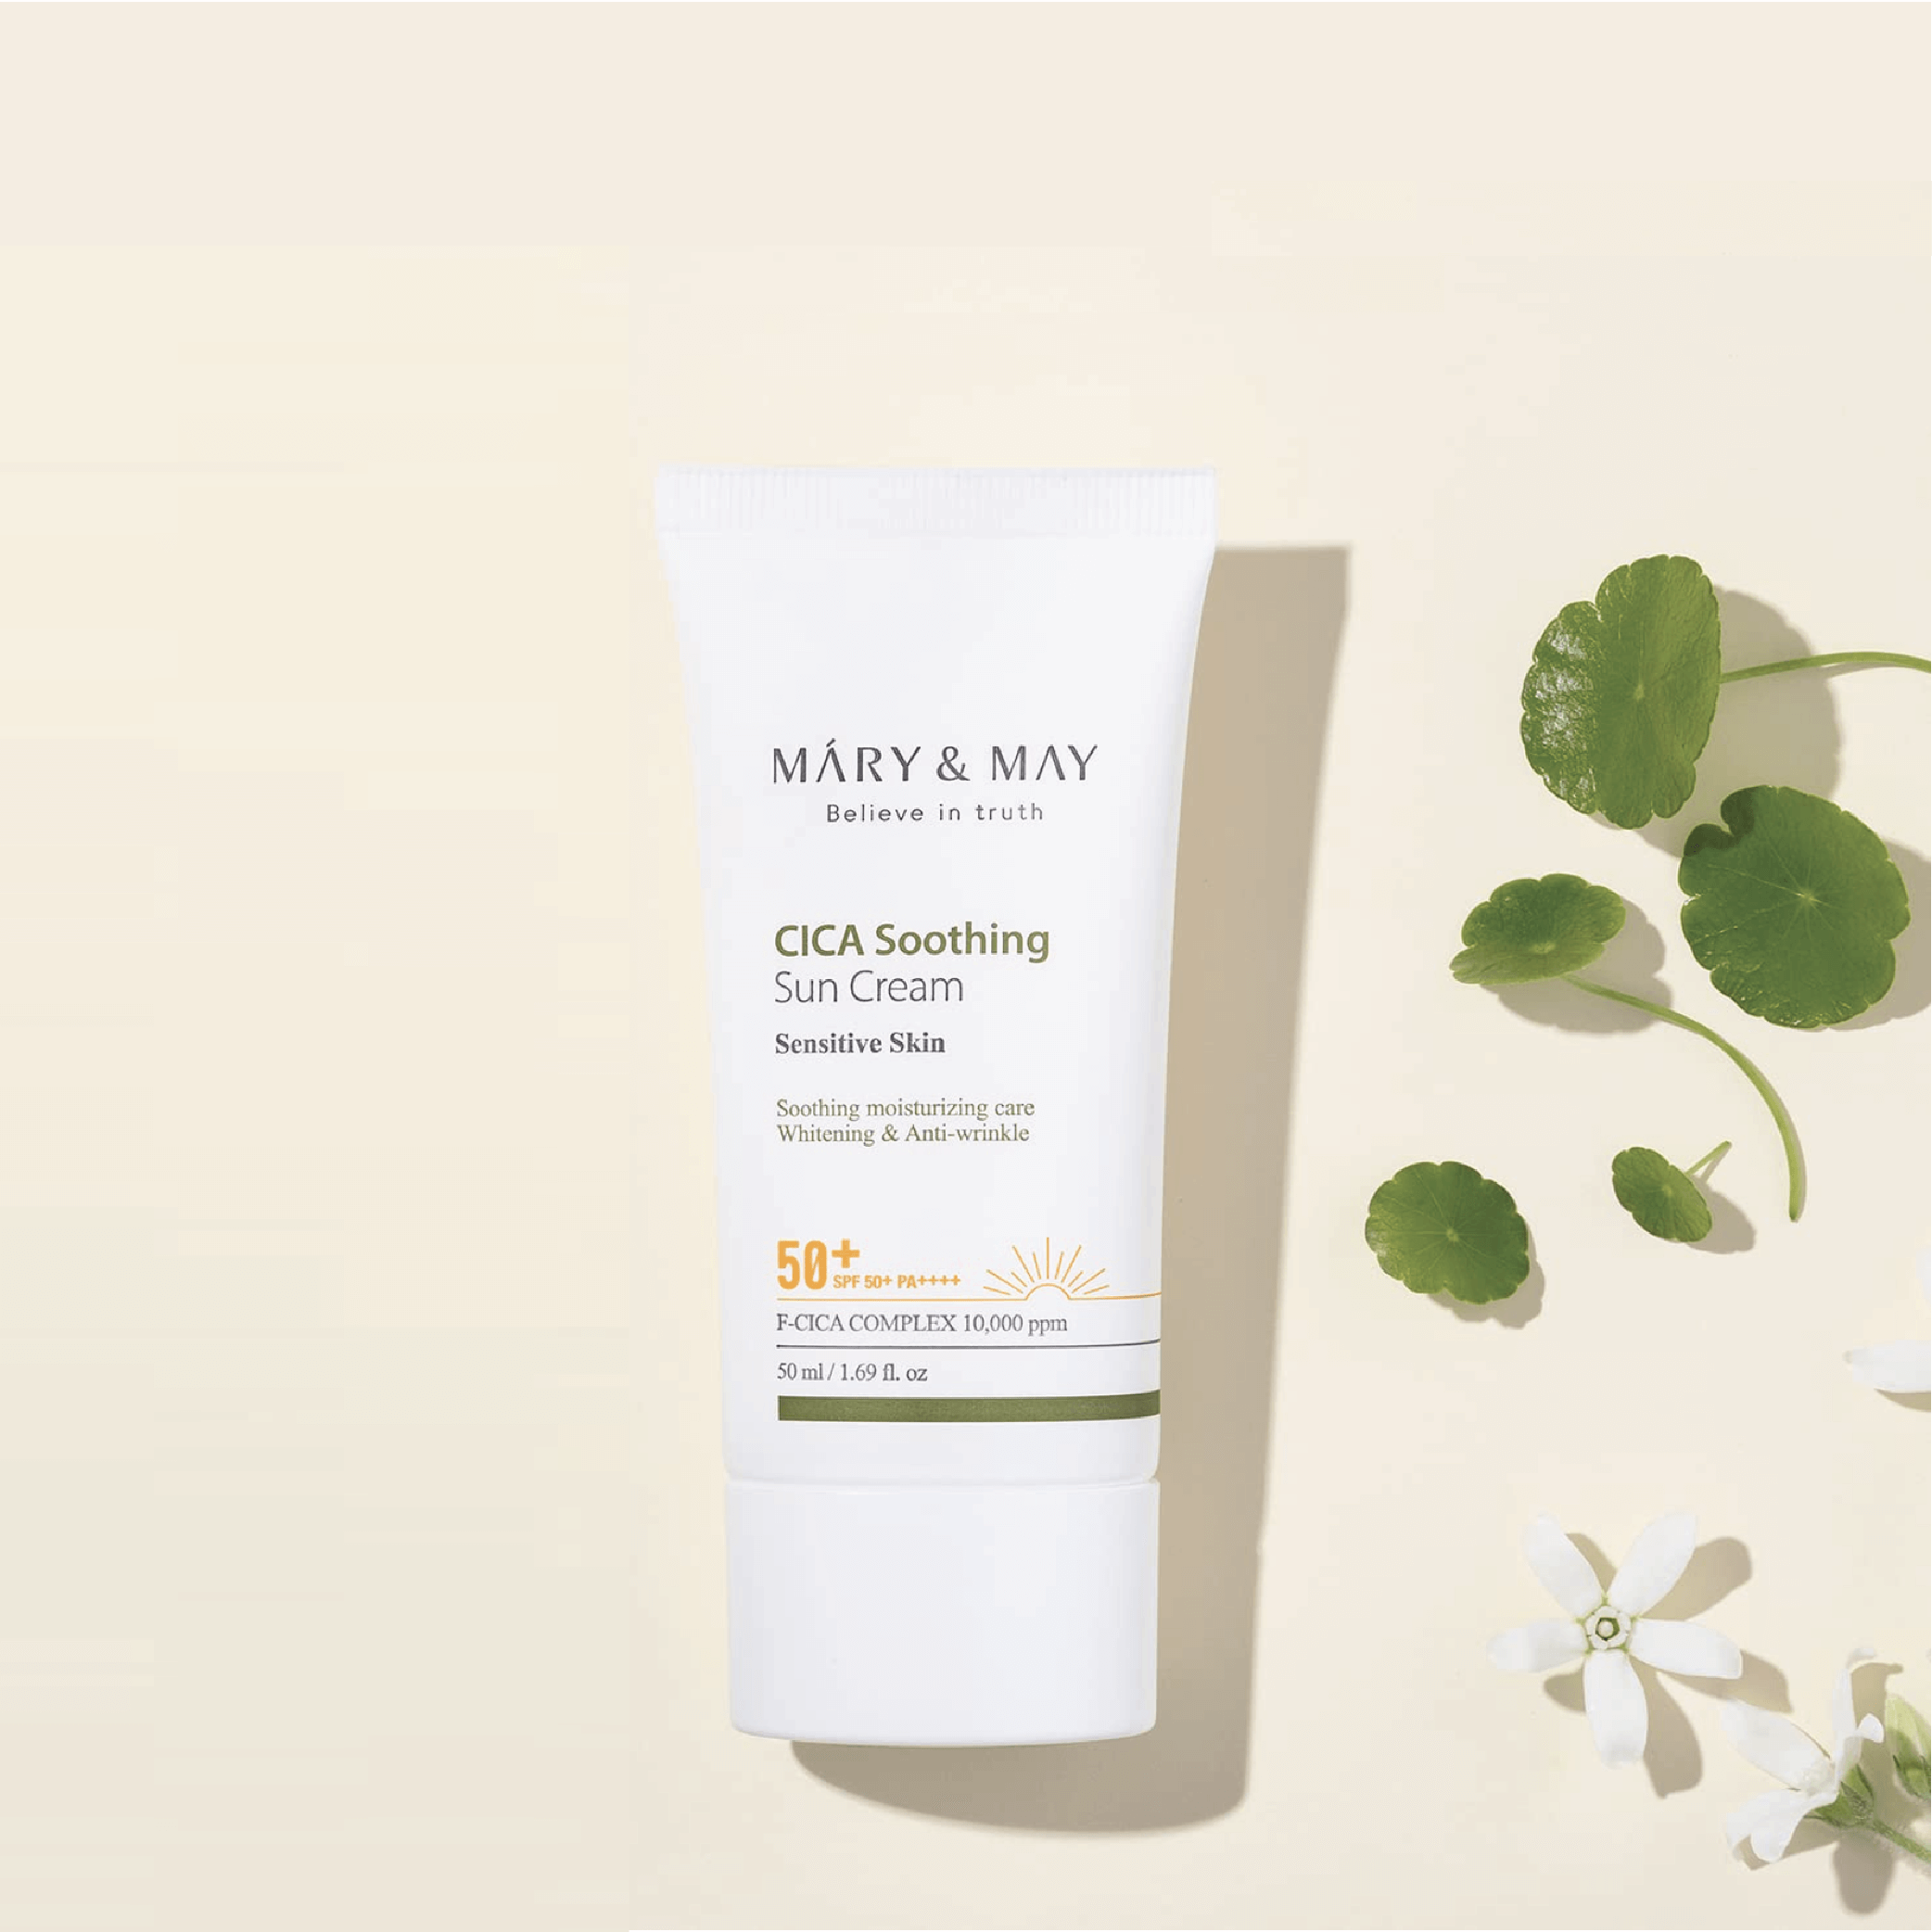 Mary & May CICA Soothing Sun Cream SPF50+ PA++++ Mary&May